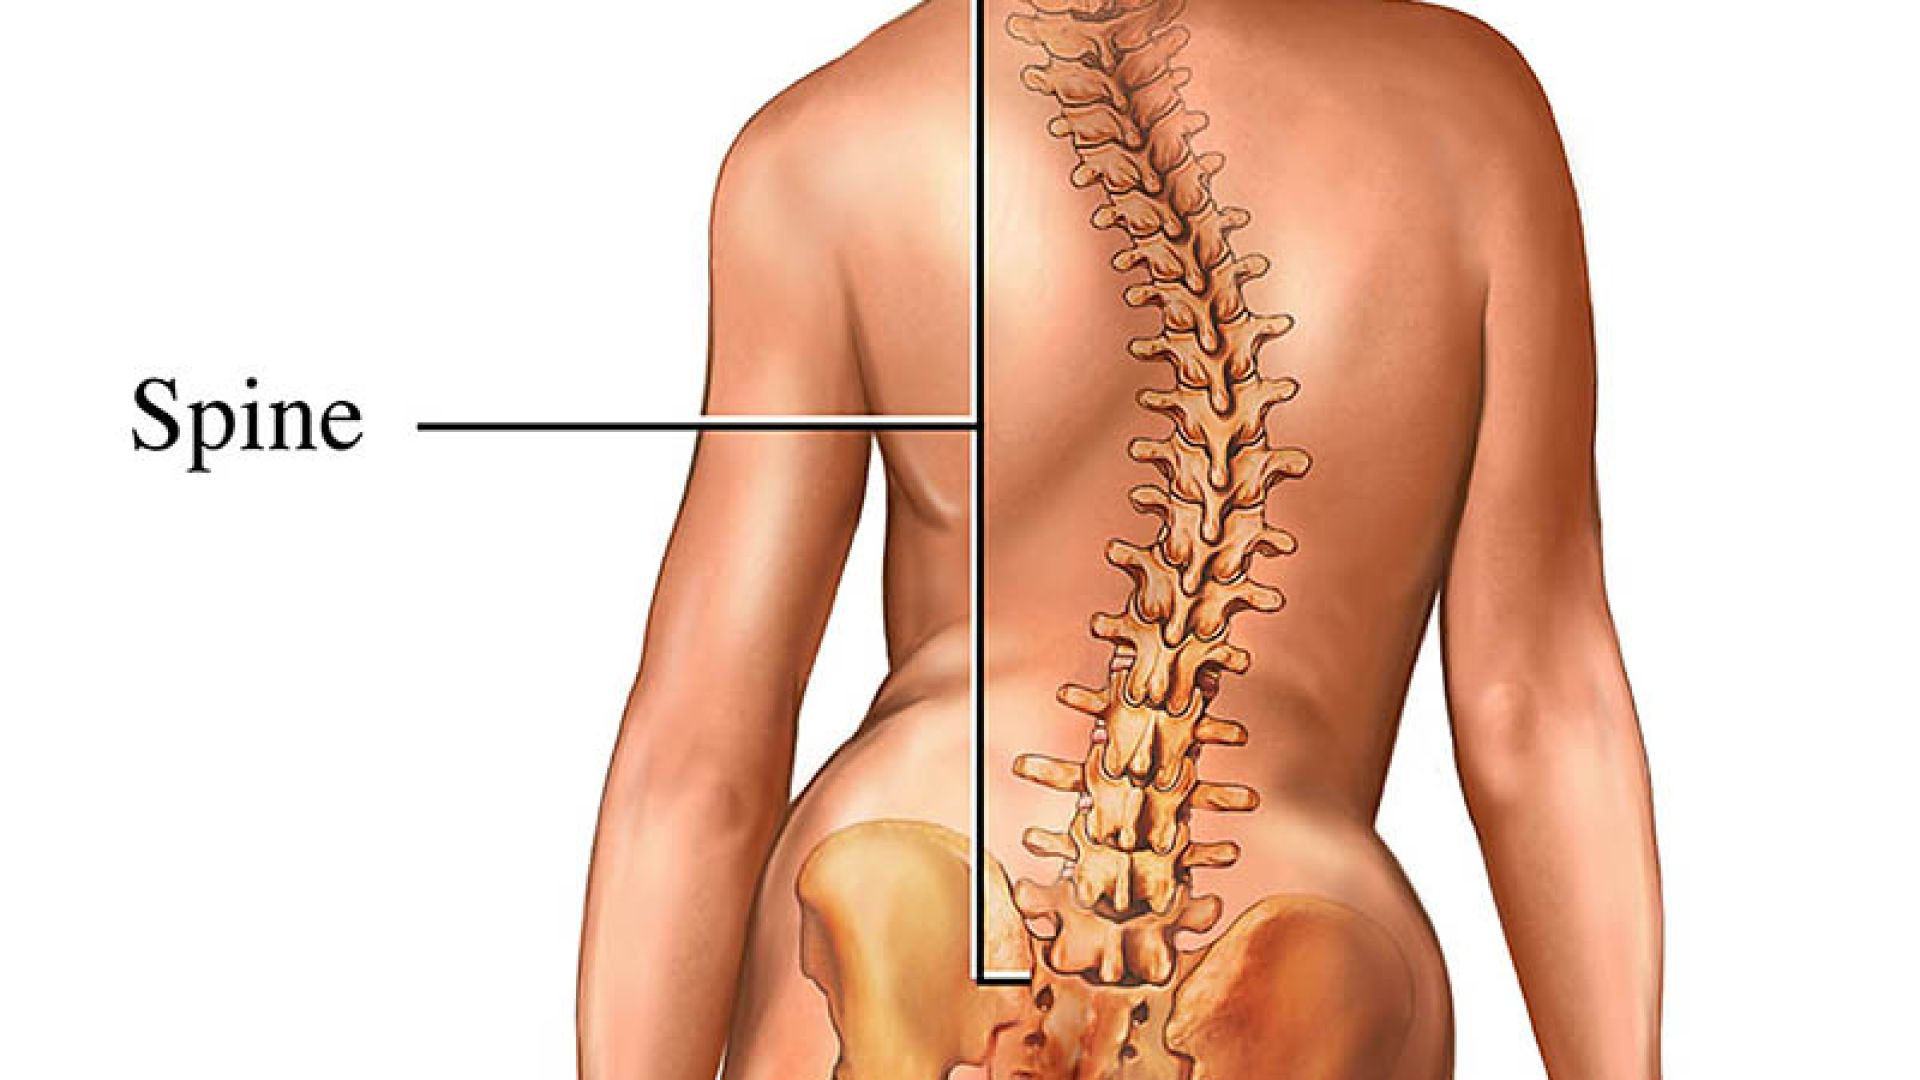 Chiropractor - A solution for Scoliosis